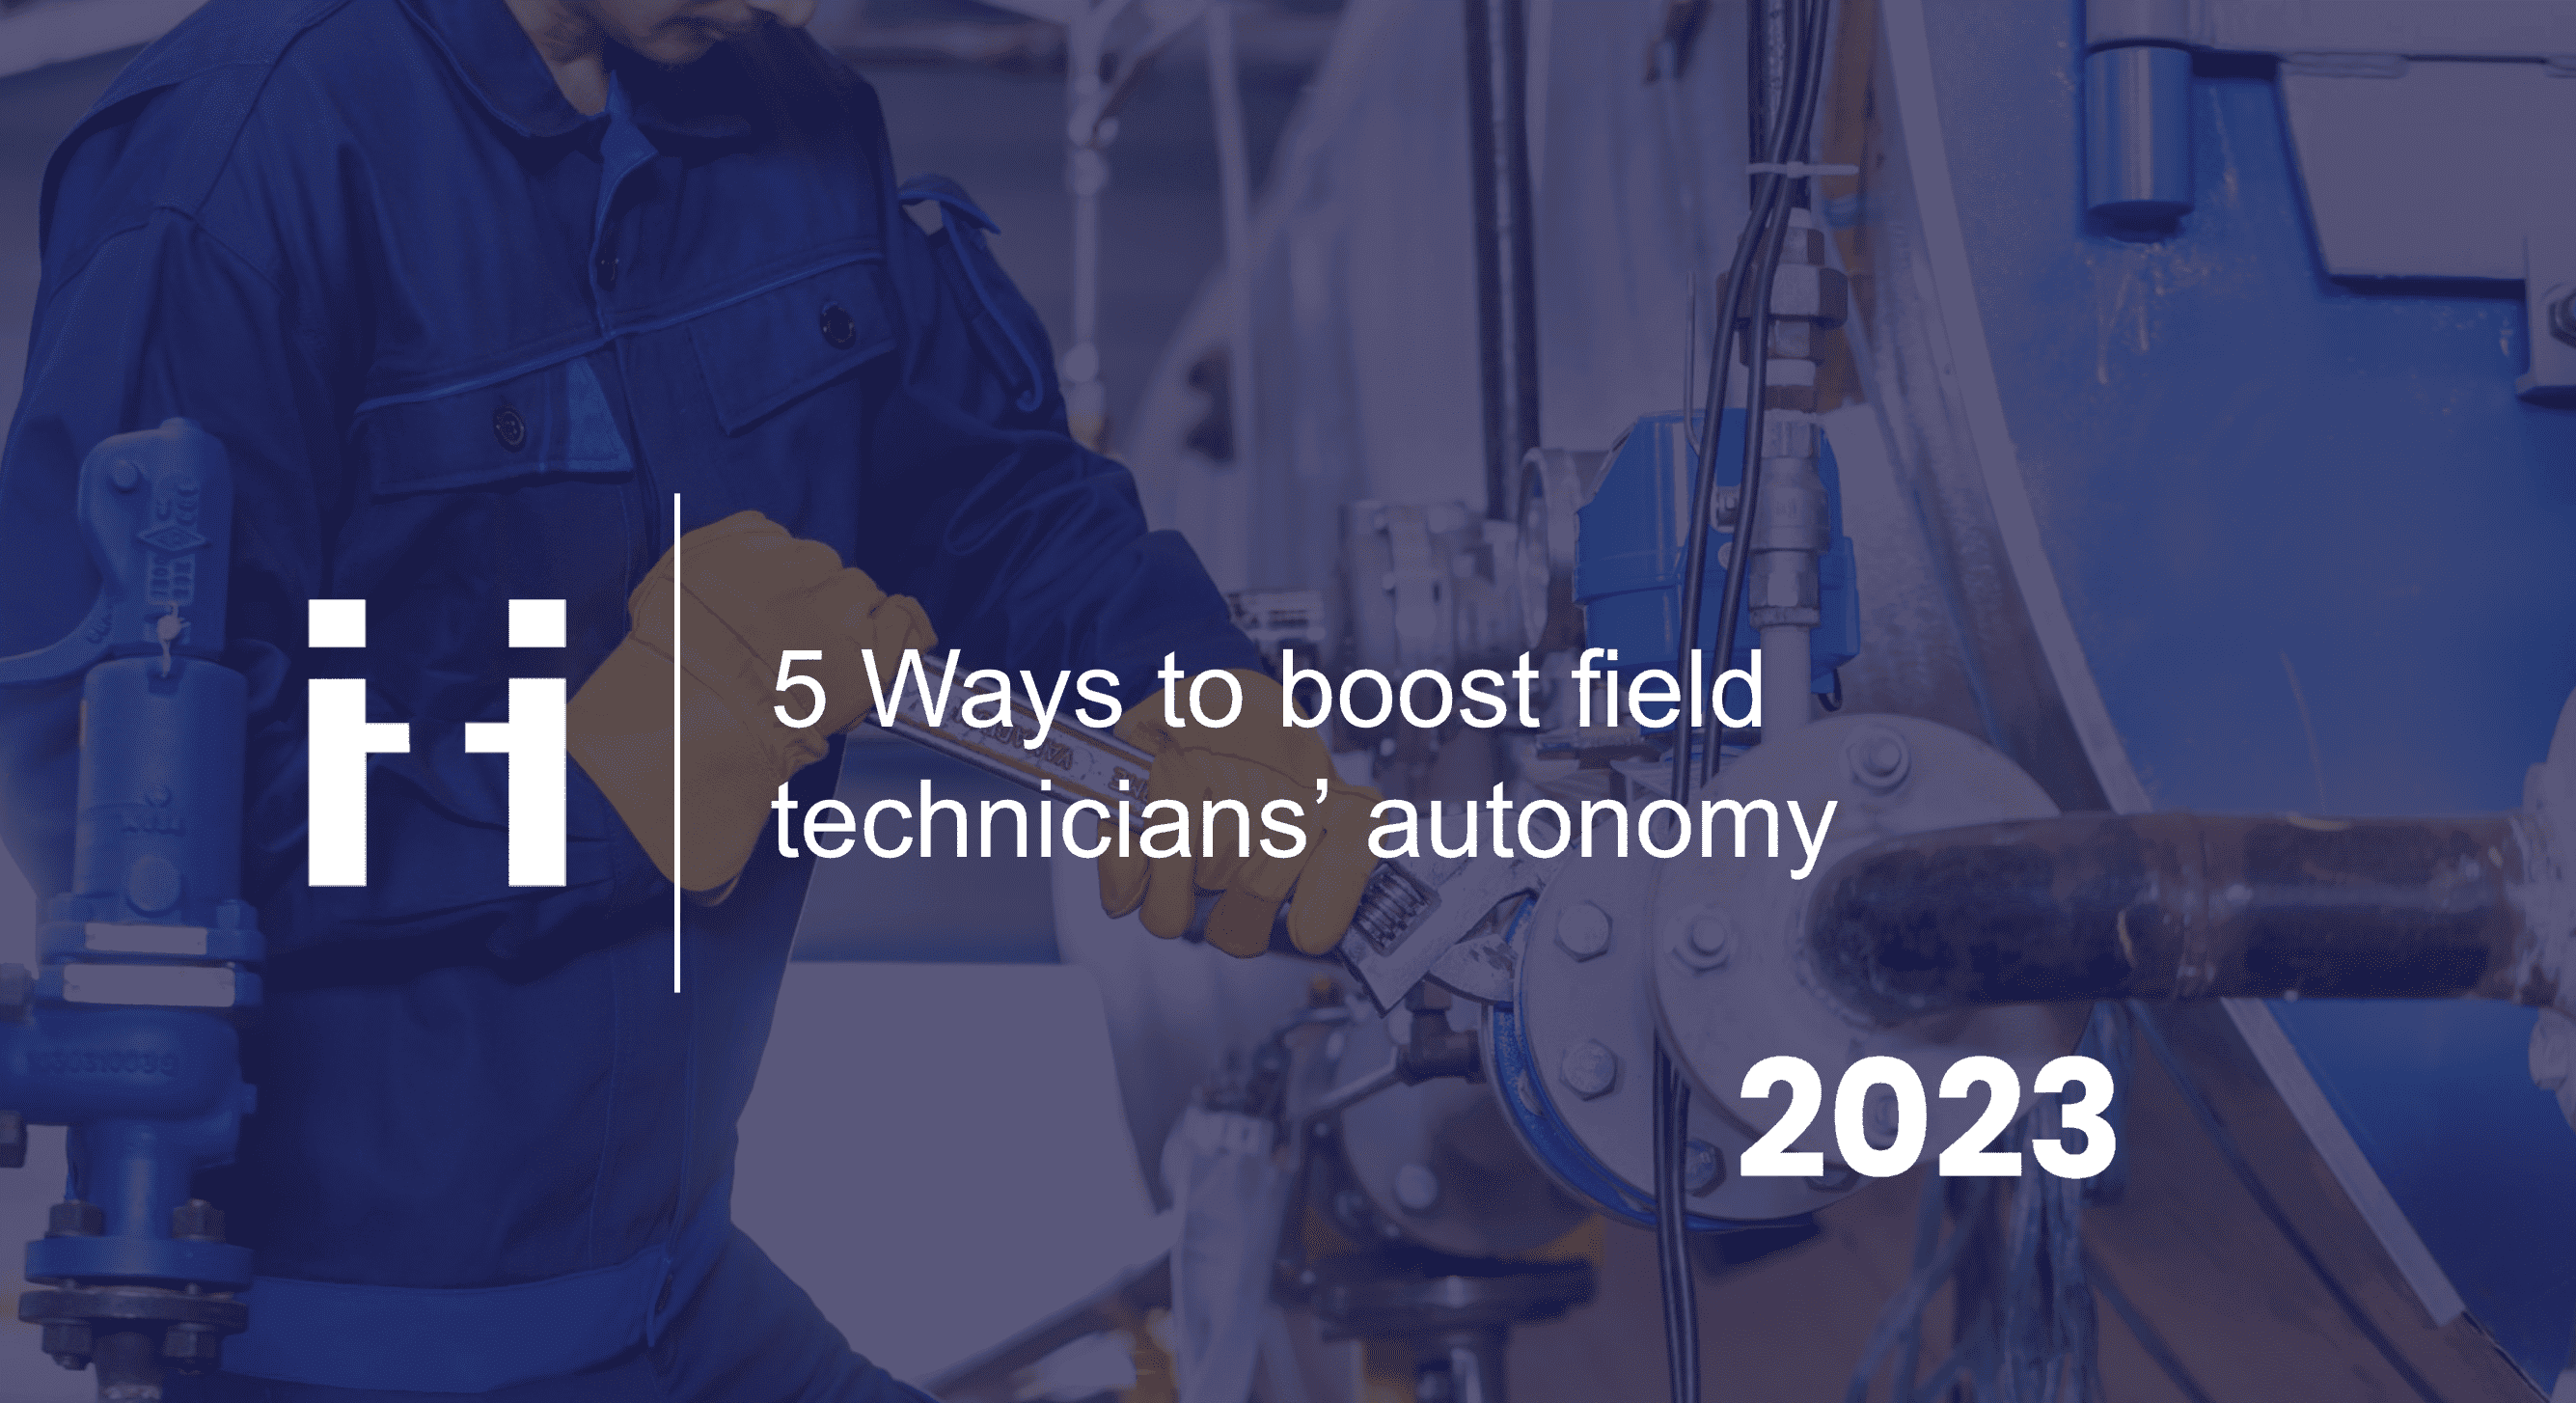 how to increase technicians' autonomy on site